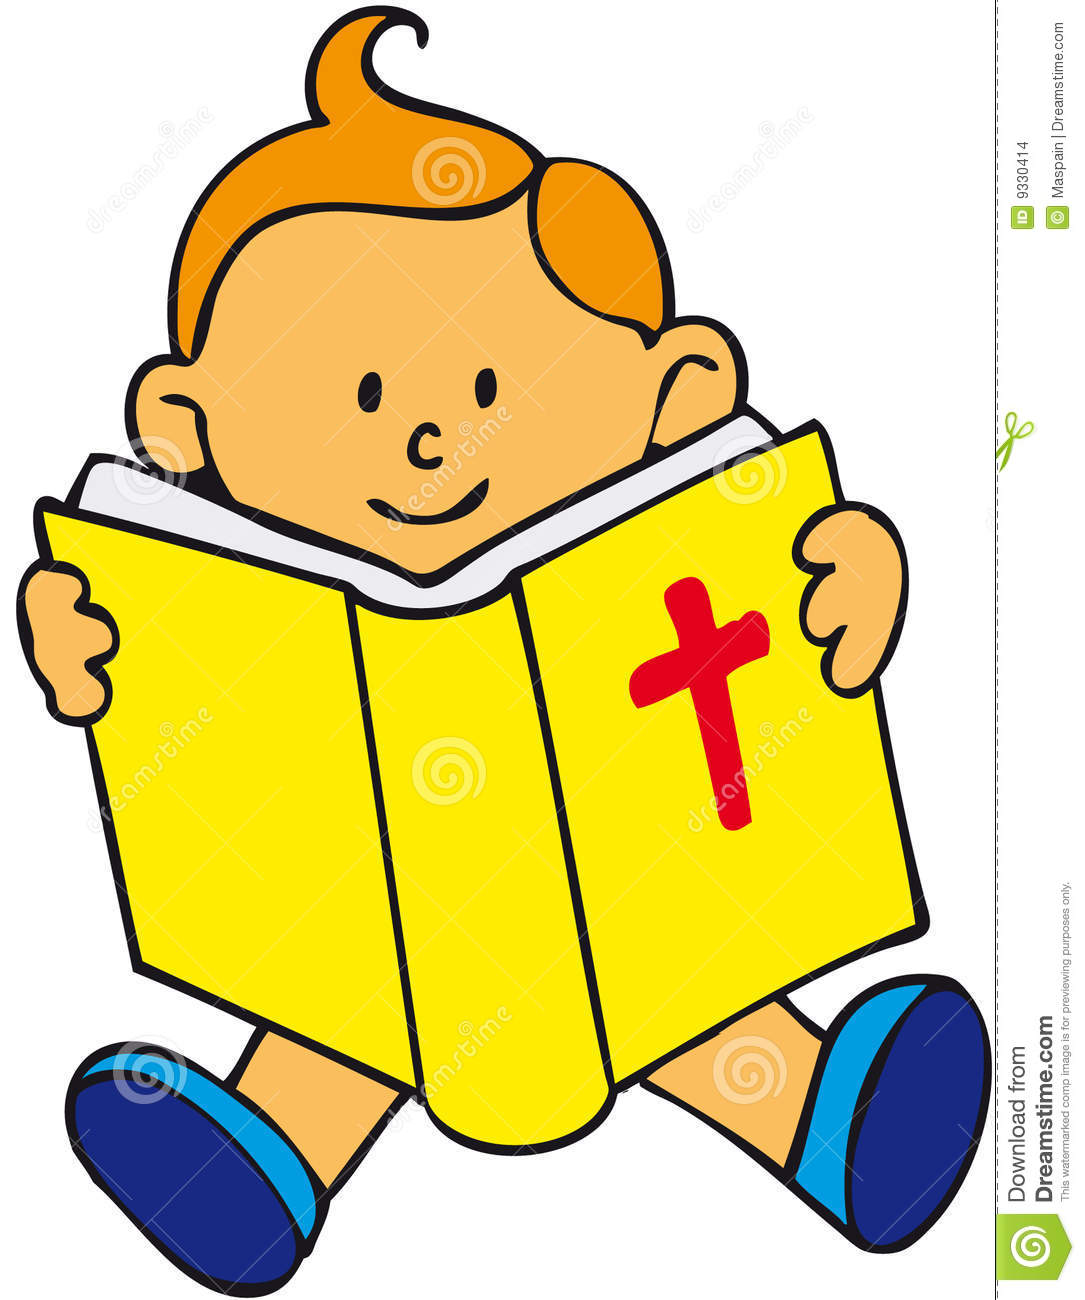 Reading The Bible Clipart   Clipart Panda   Free Clipart Images